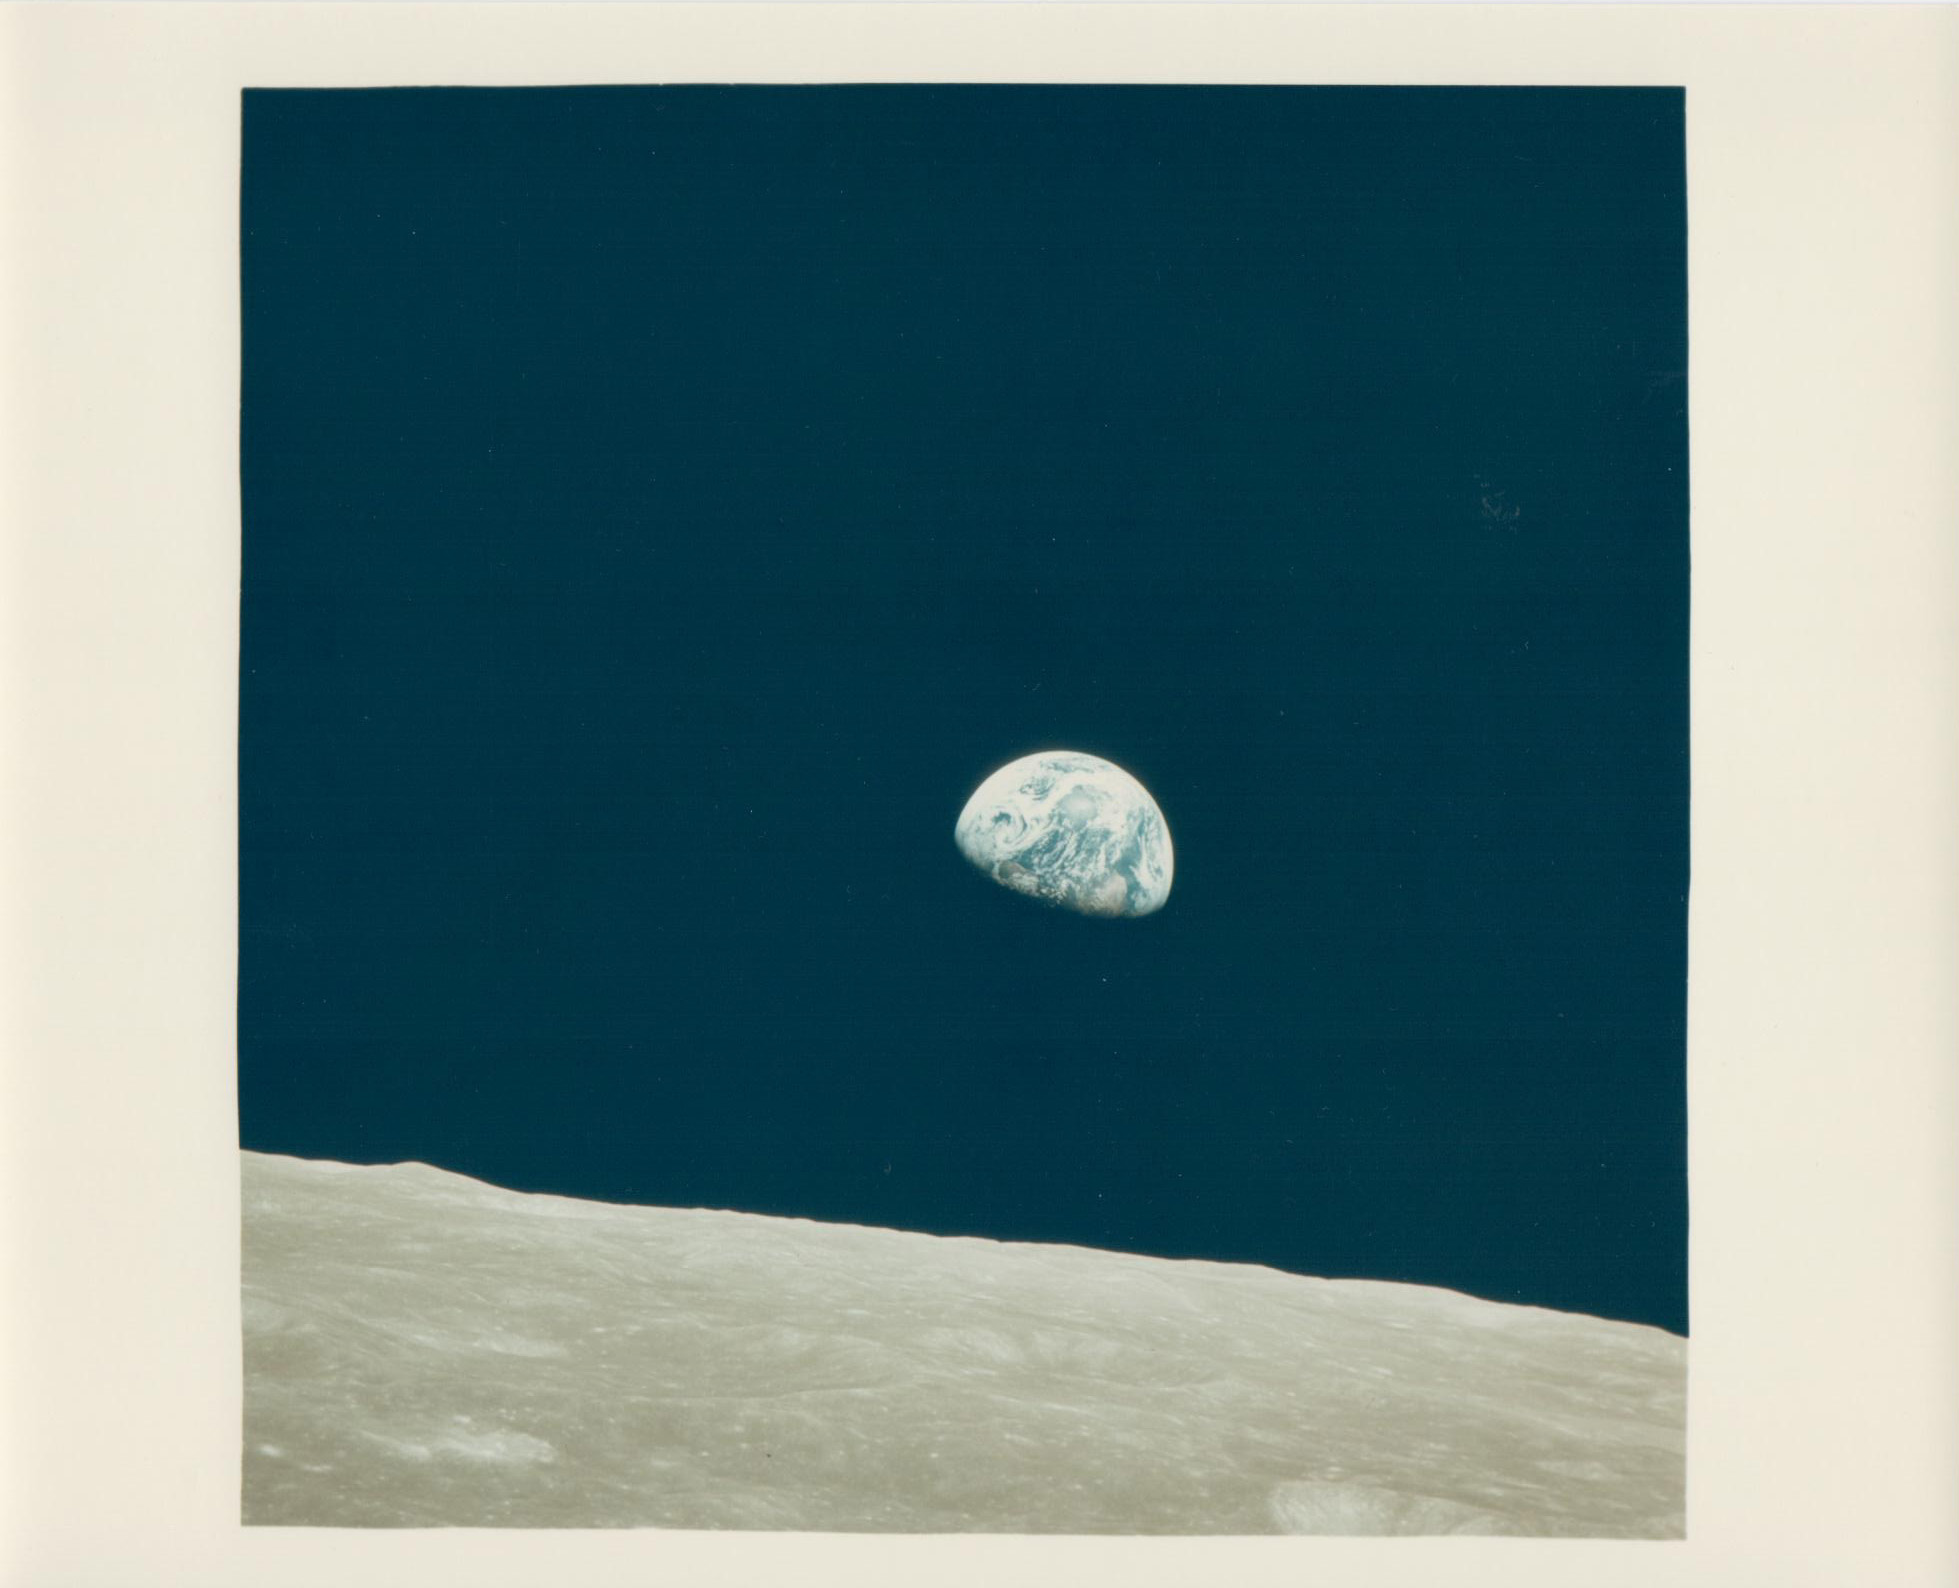 Earthrise, the first ever witnessed by human eyes, Apollo 8, December 1968